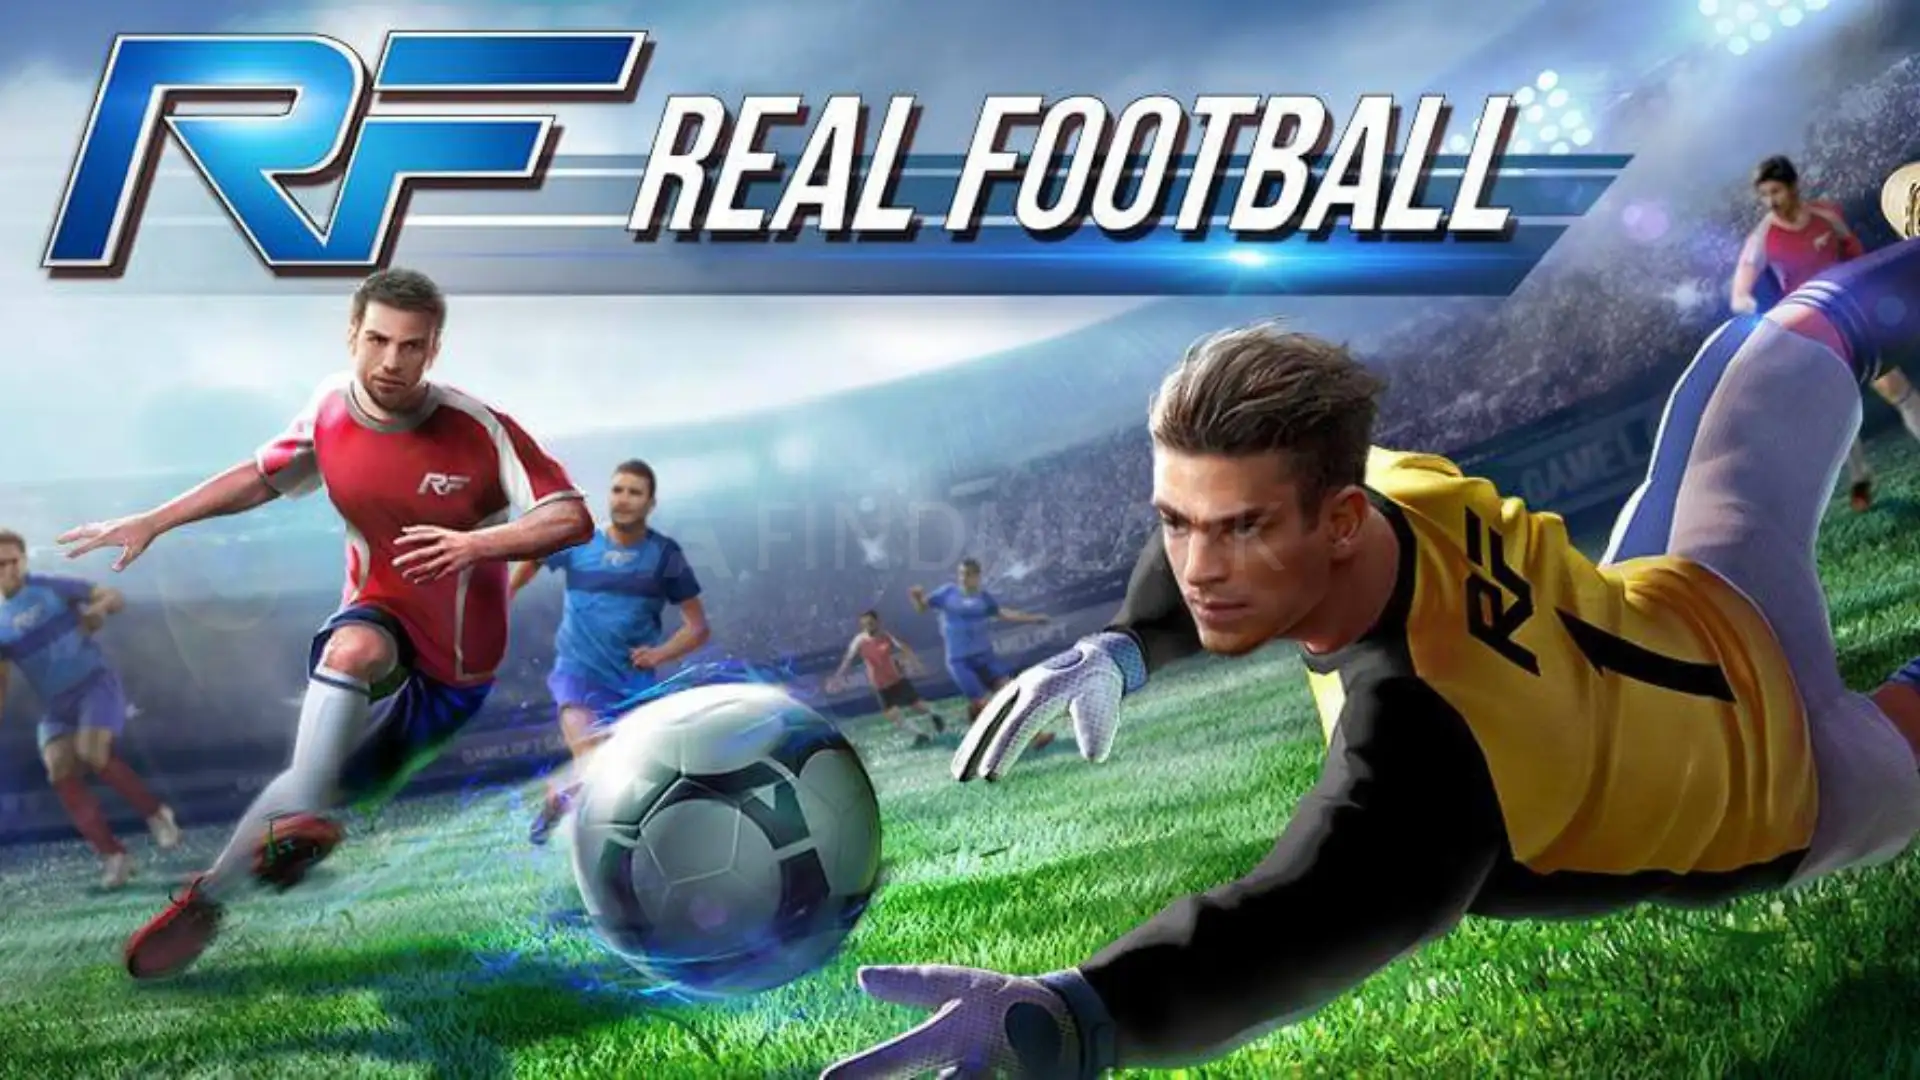 Real Football feature image